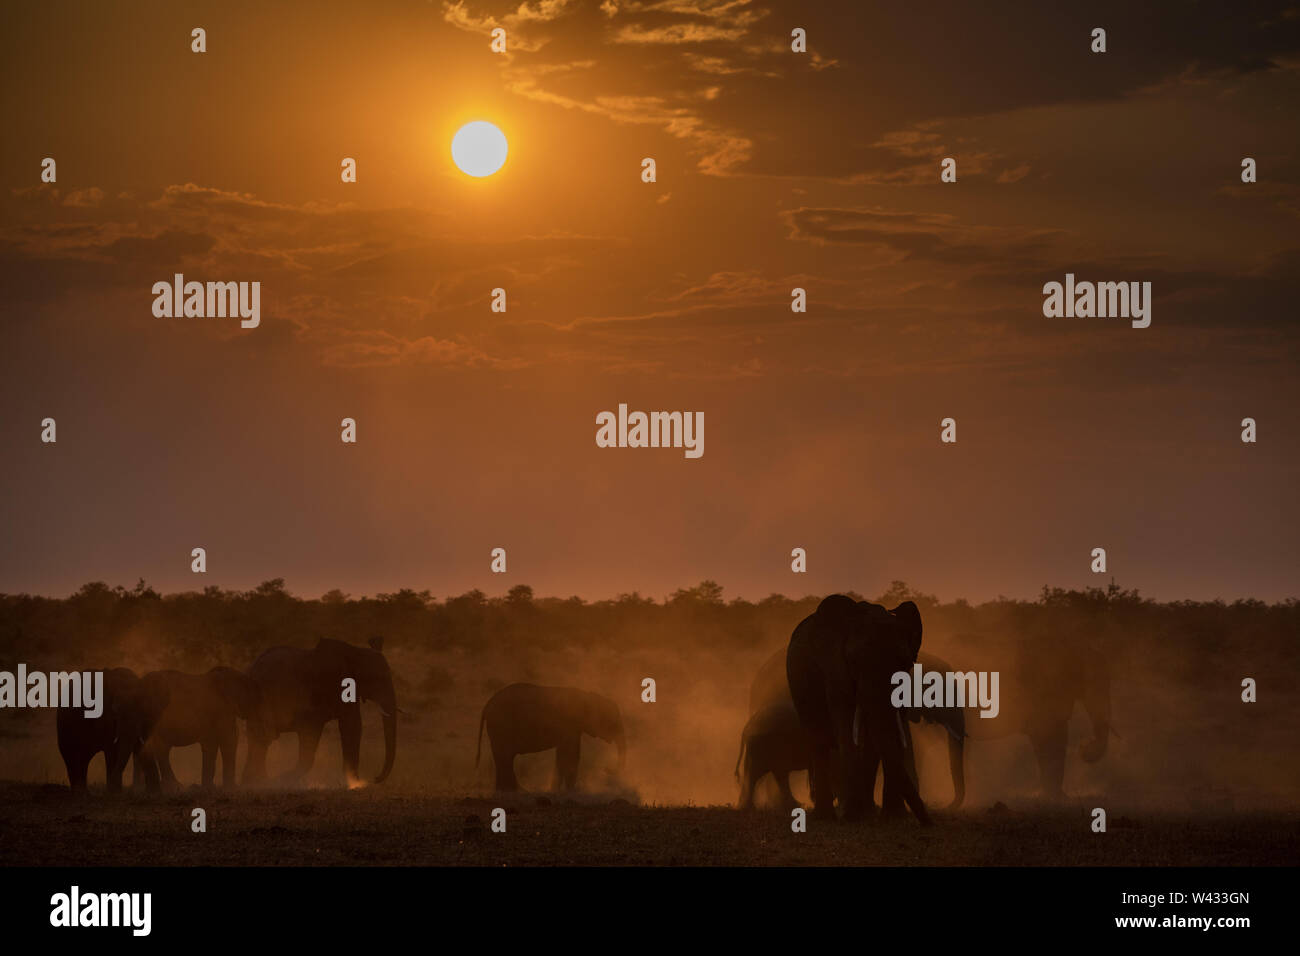 Mooiplaas is a popular waterhole for elephants, Loxodonta africana, to come to drink at sunset in the Mopani Region, Kruger National Park, Limpopo, So Stock Photo